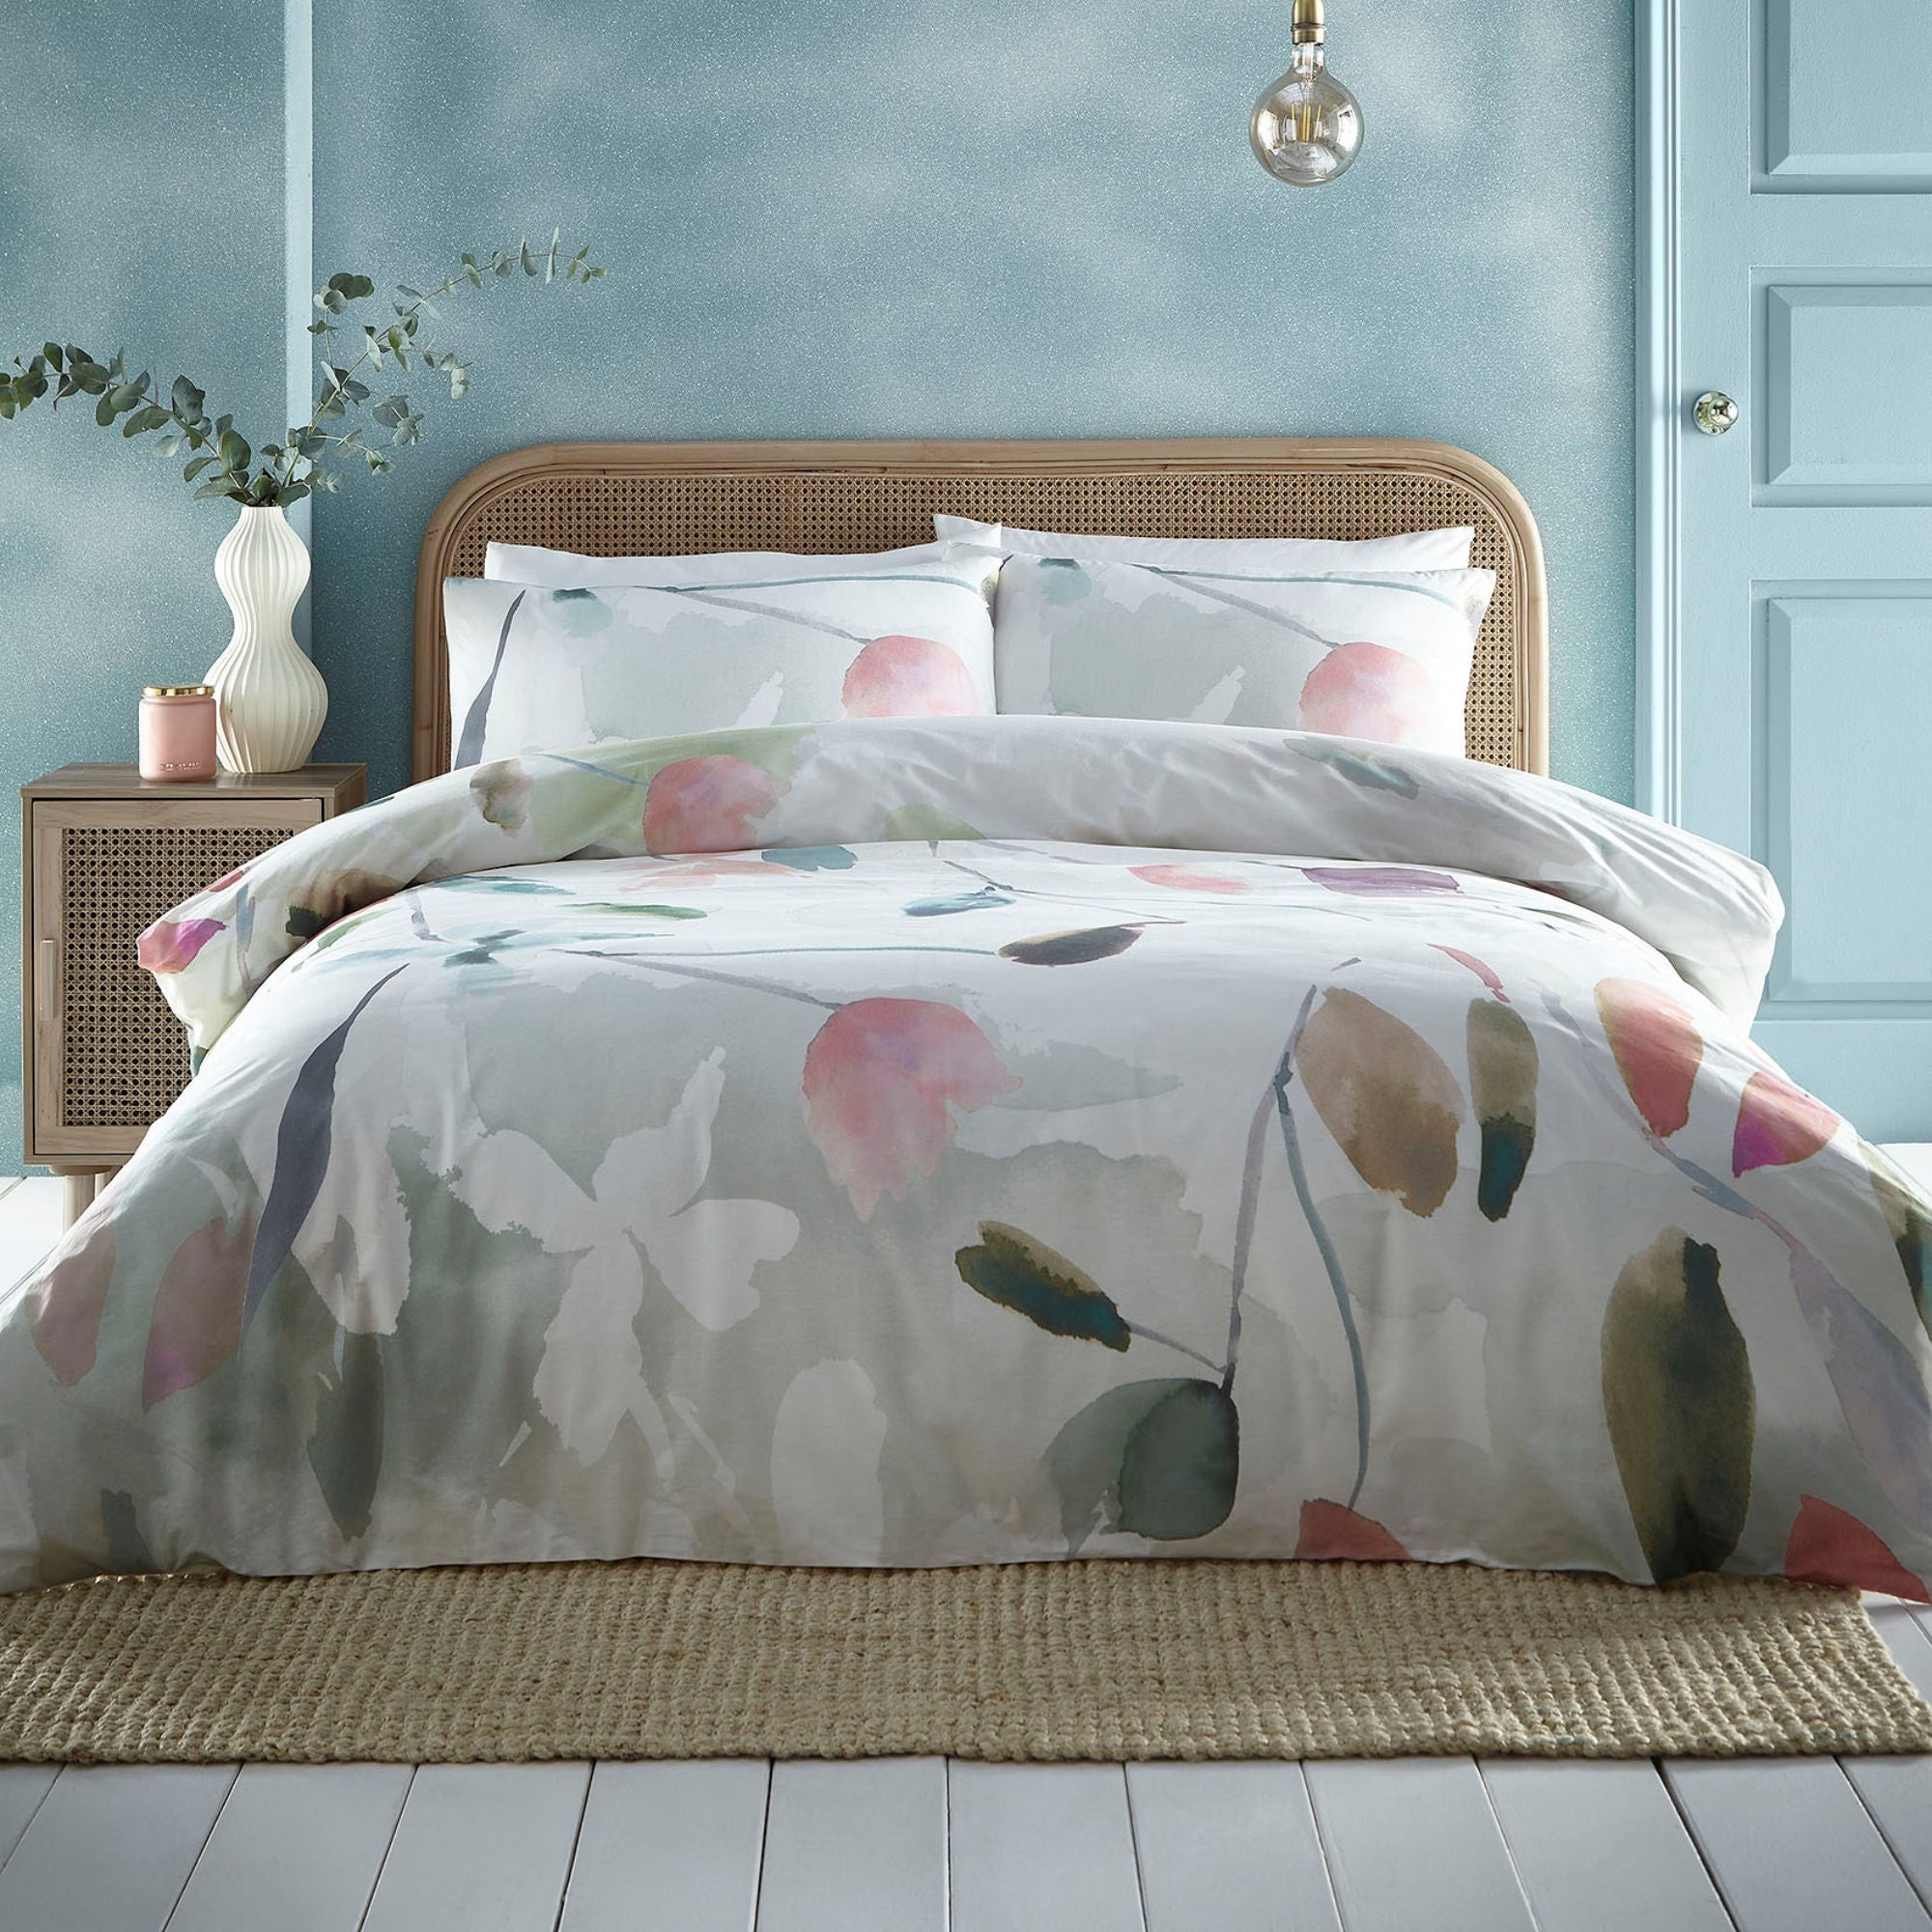 Maeve Duvet Cover Set by Appletree Style in Multi - Duvet Cover Set - Appletree Style